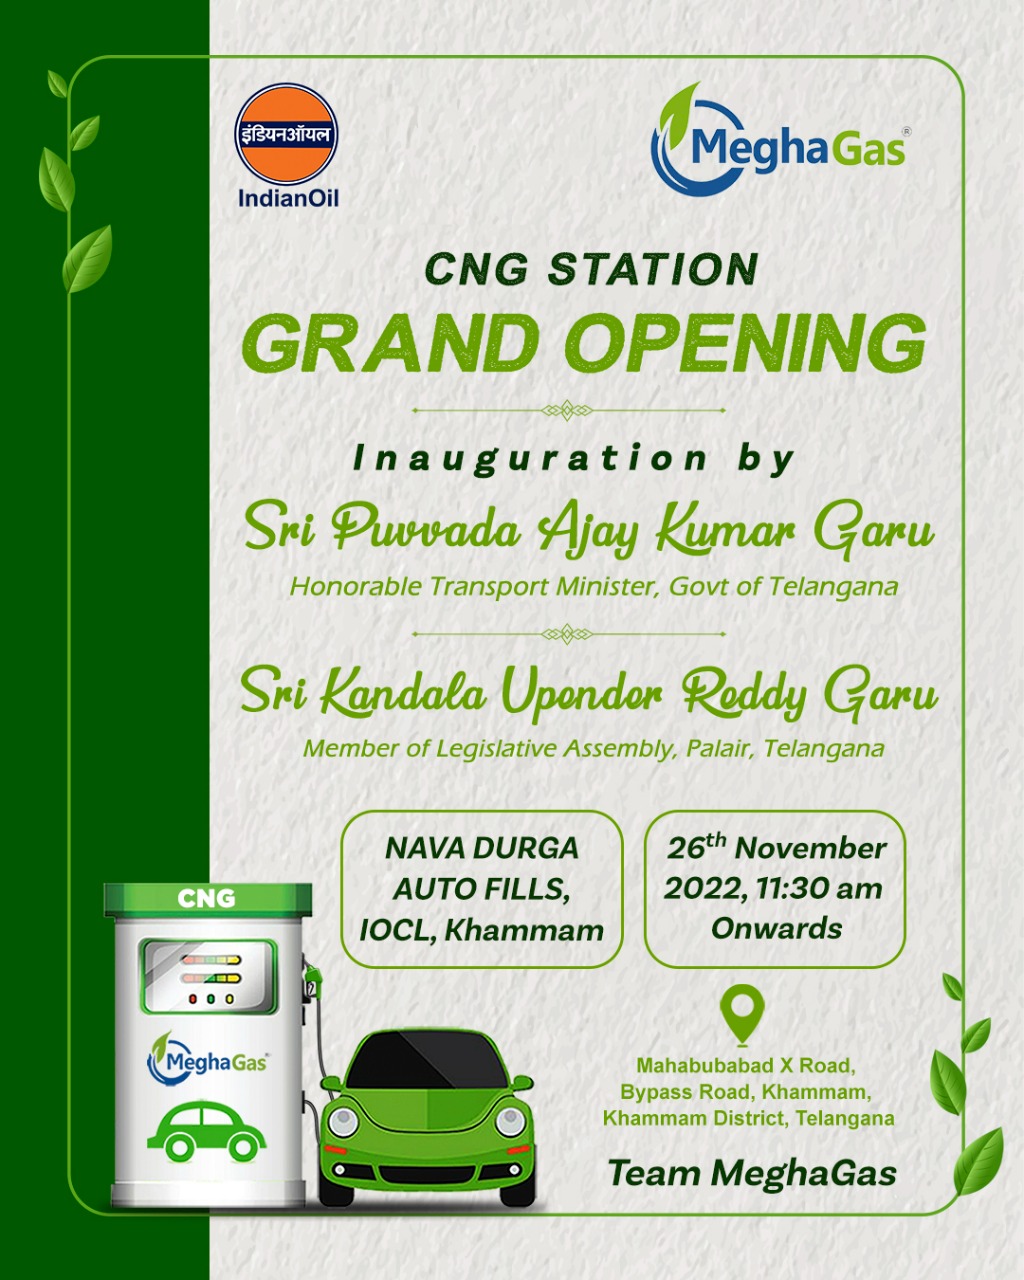 Transport Minister to inaugurate MeghaGas CNG station in Khammam